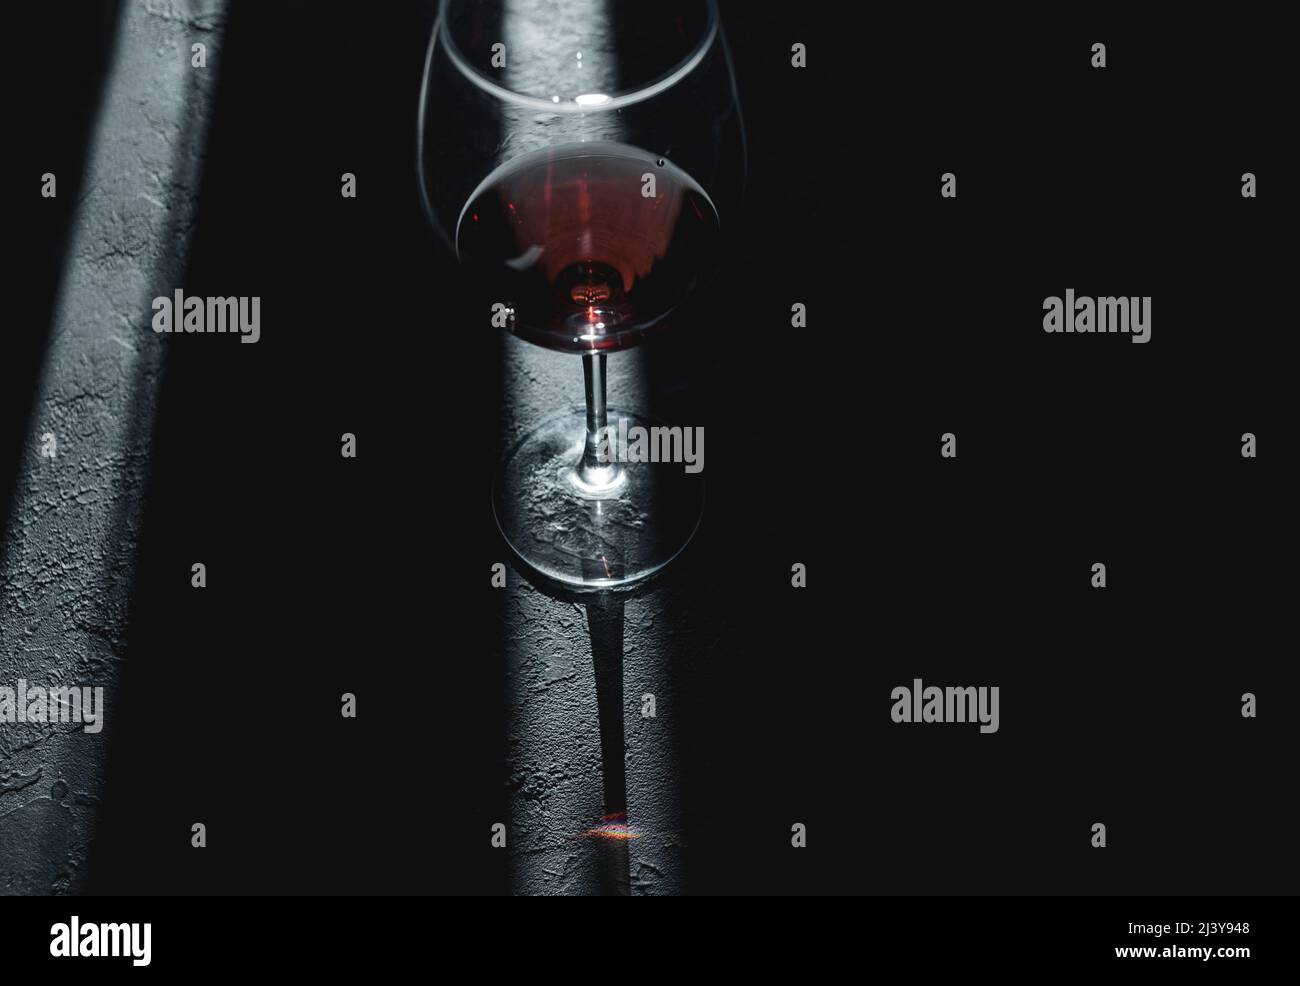 https://c8.alamy.com/comp/2J3Y948/wine-glass-with-traditional-round-goblet-shape-filled-with-dark-red-wine-and-slim-stem-on-table-selective-focus-2J3Y948.jpg